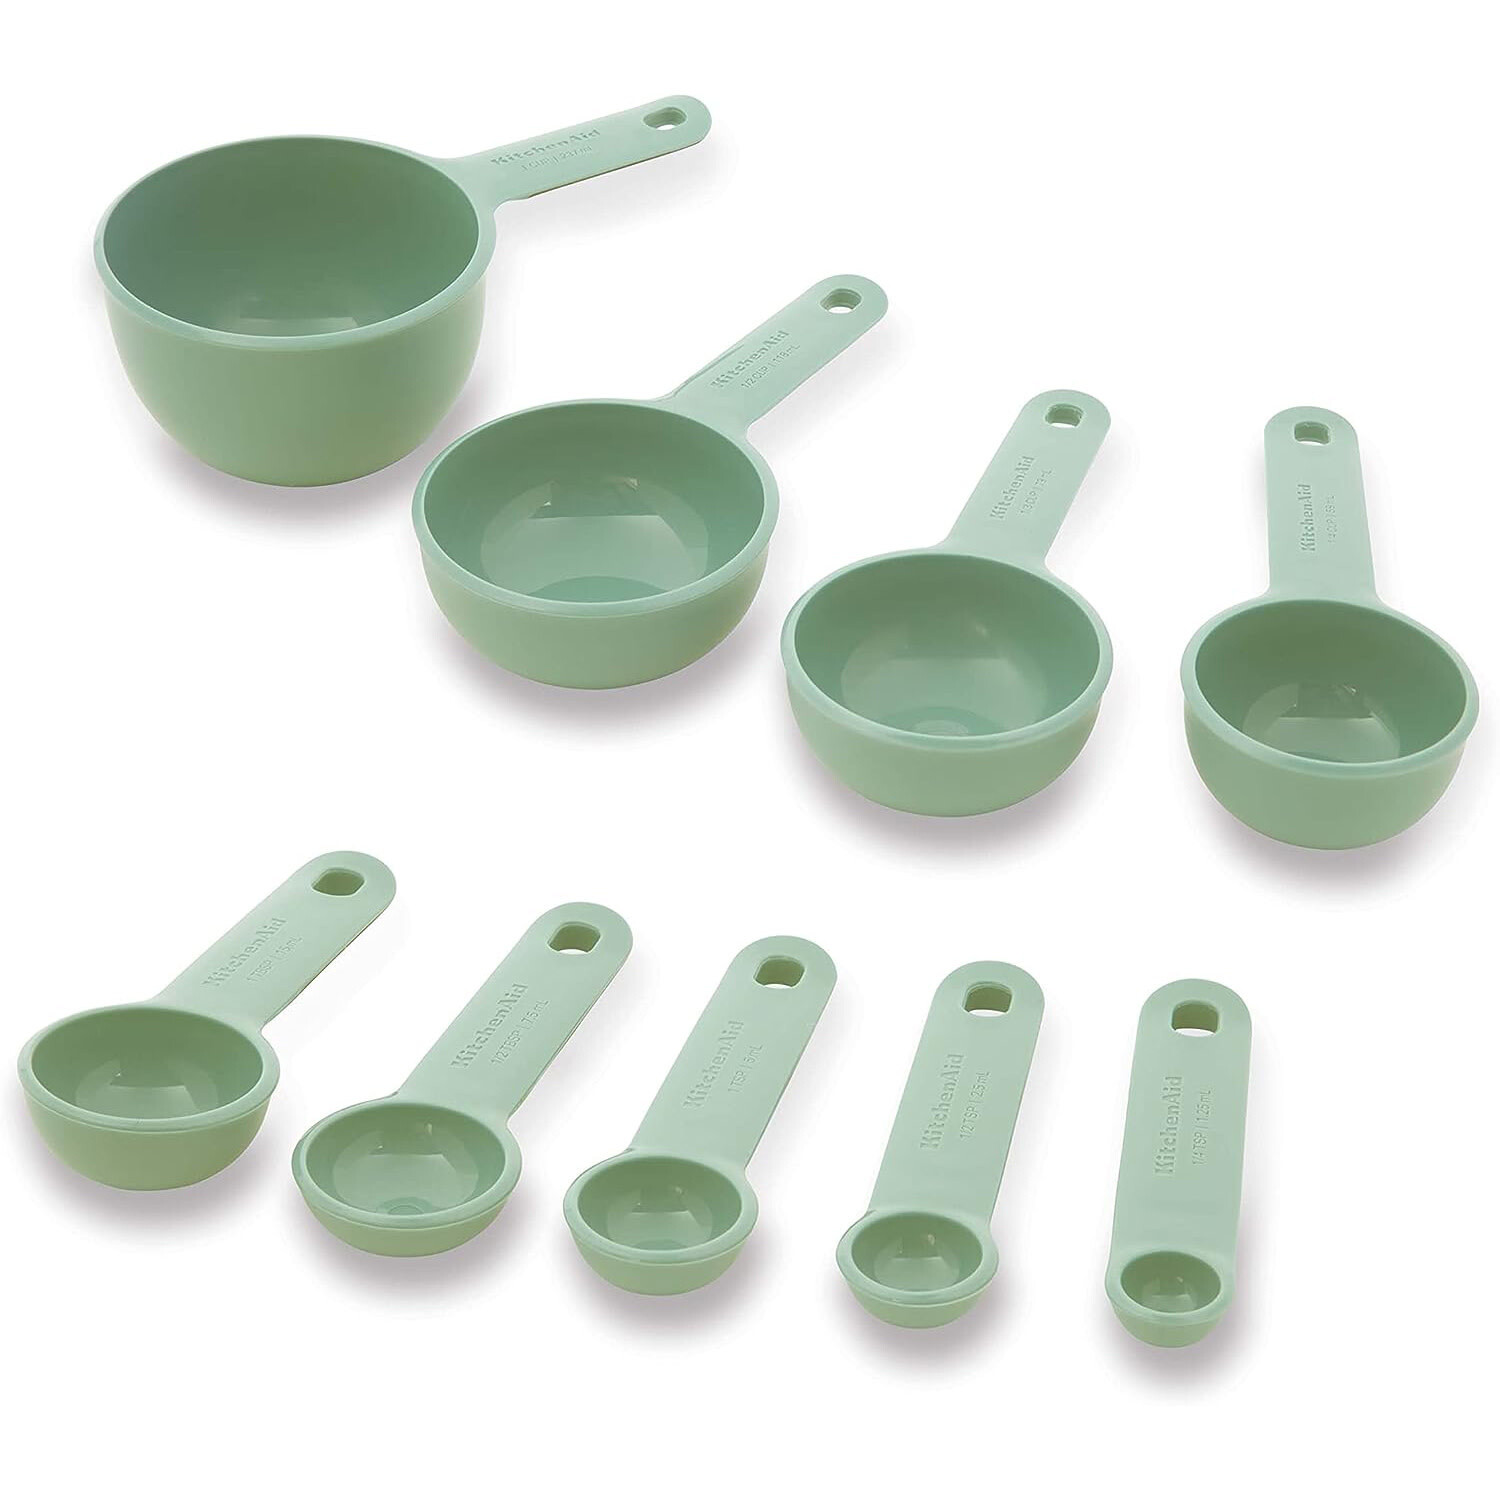 Measuring Cups & Spoons